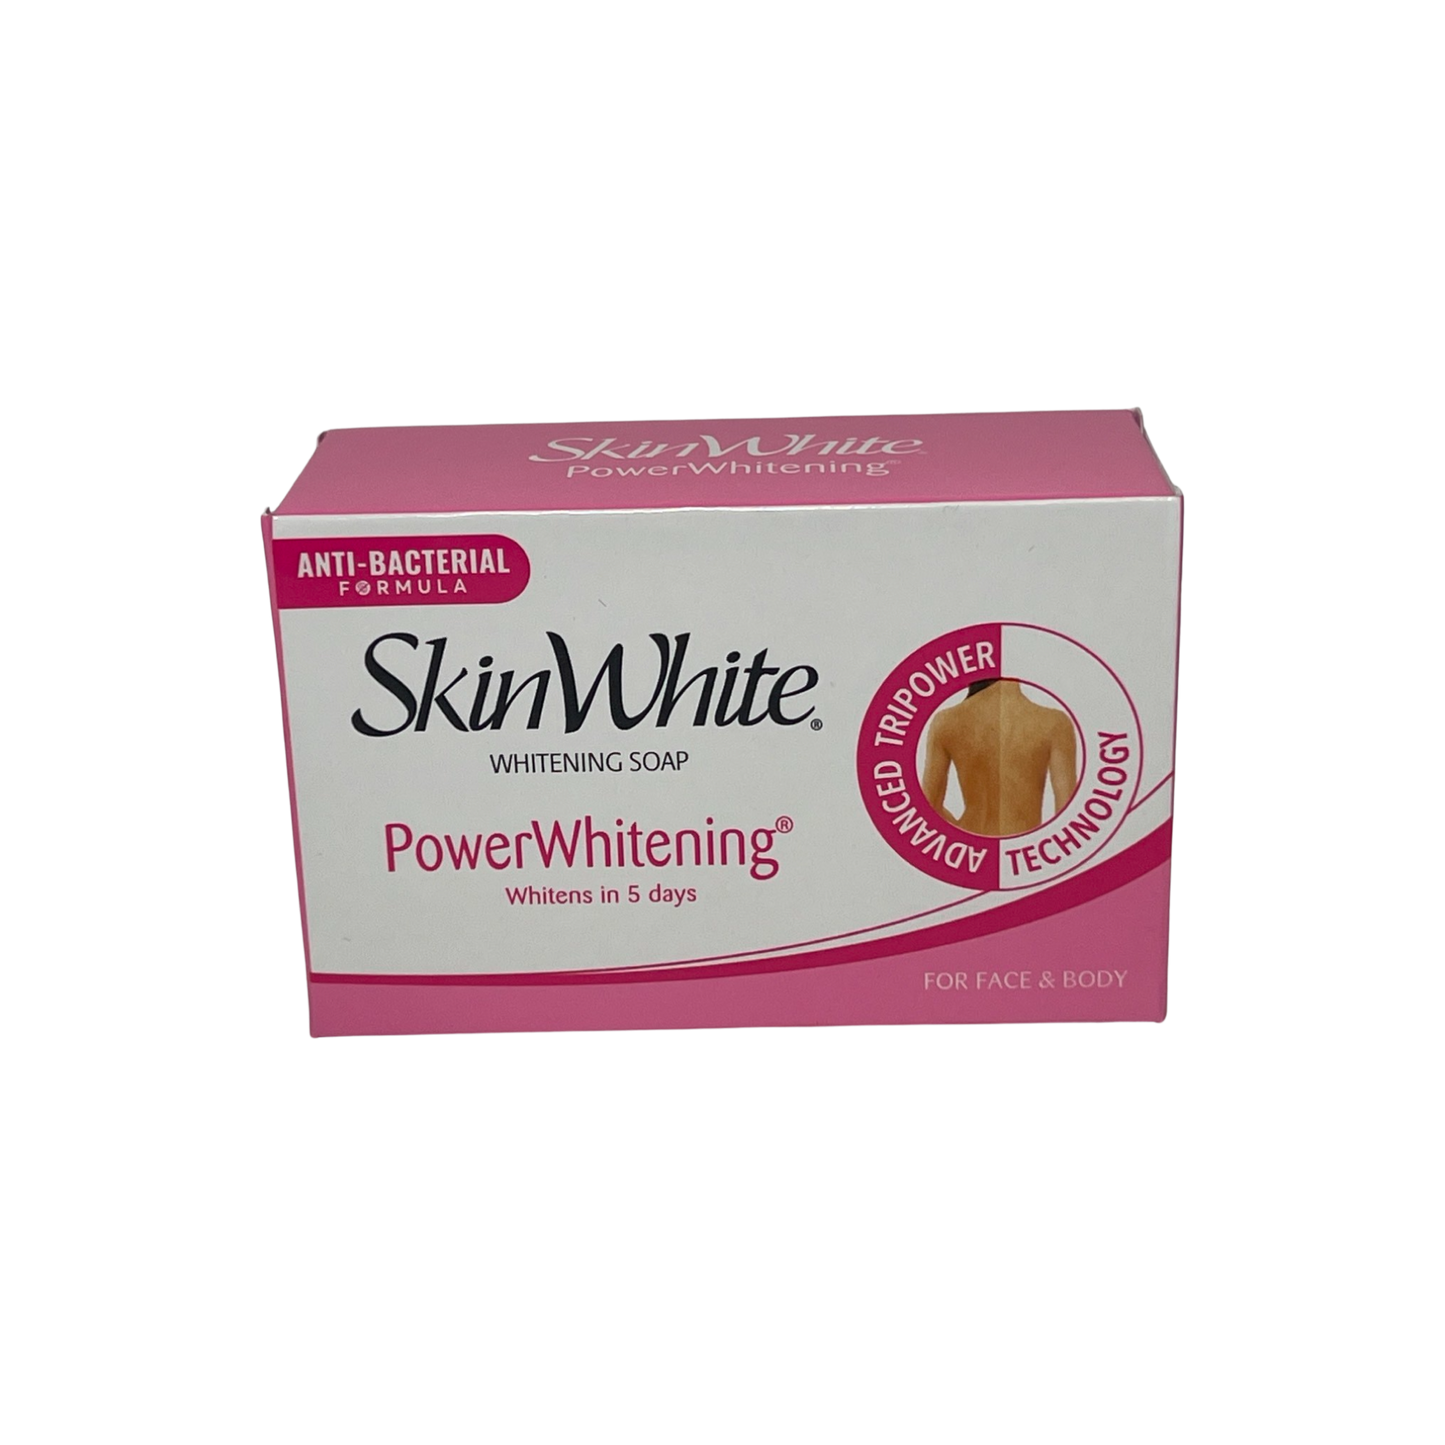 Skin White Whitening Soap Power Whitening For Face and Body (Pink) 125g